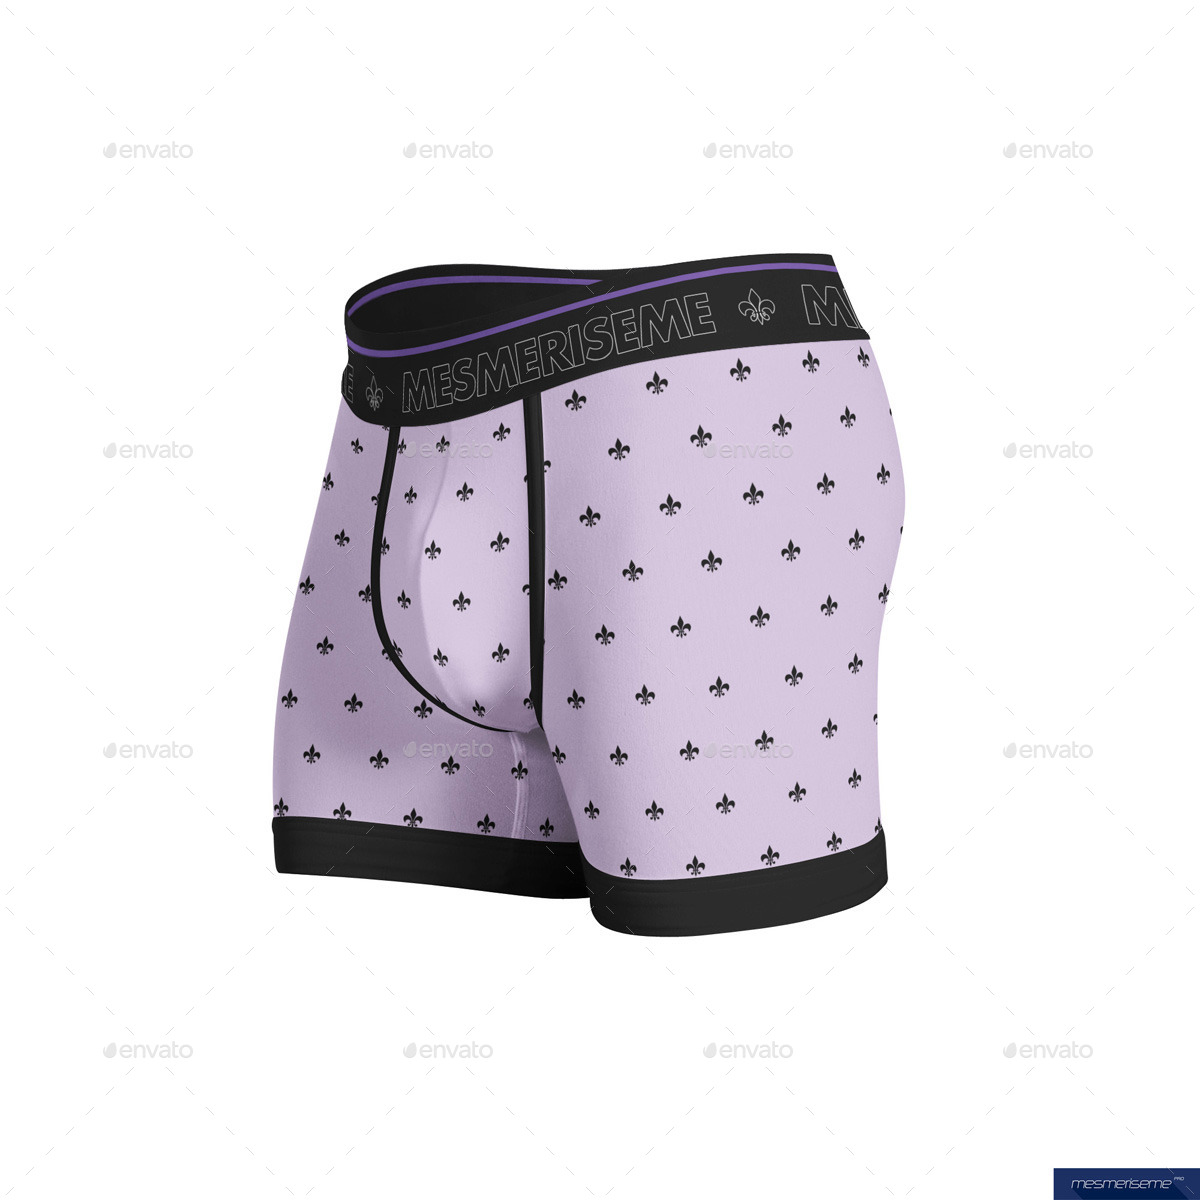 Download Trunks and Boxer Briefs Boxers Mock-up by mesmeriseme_pro | GraphicRiver